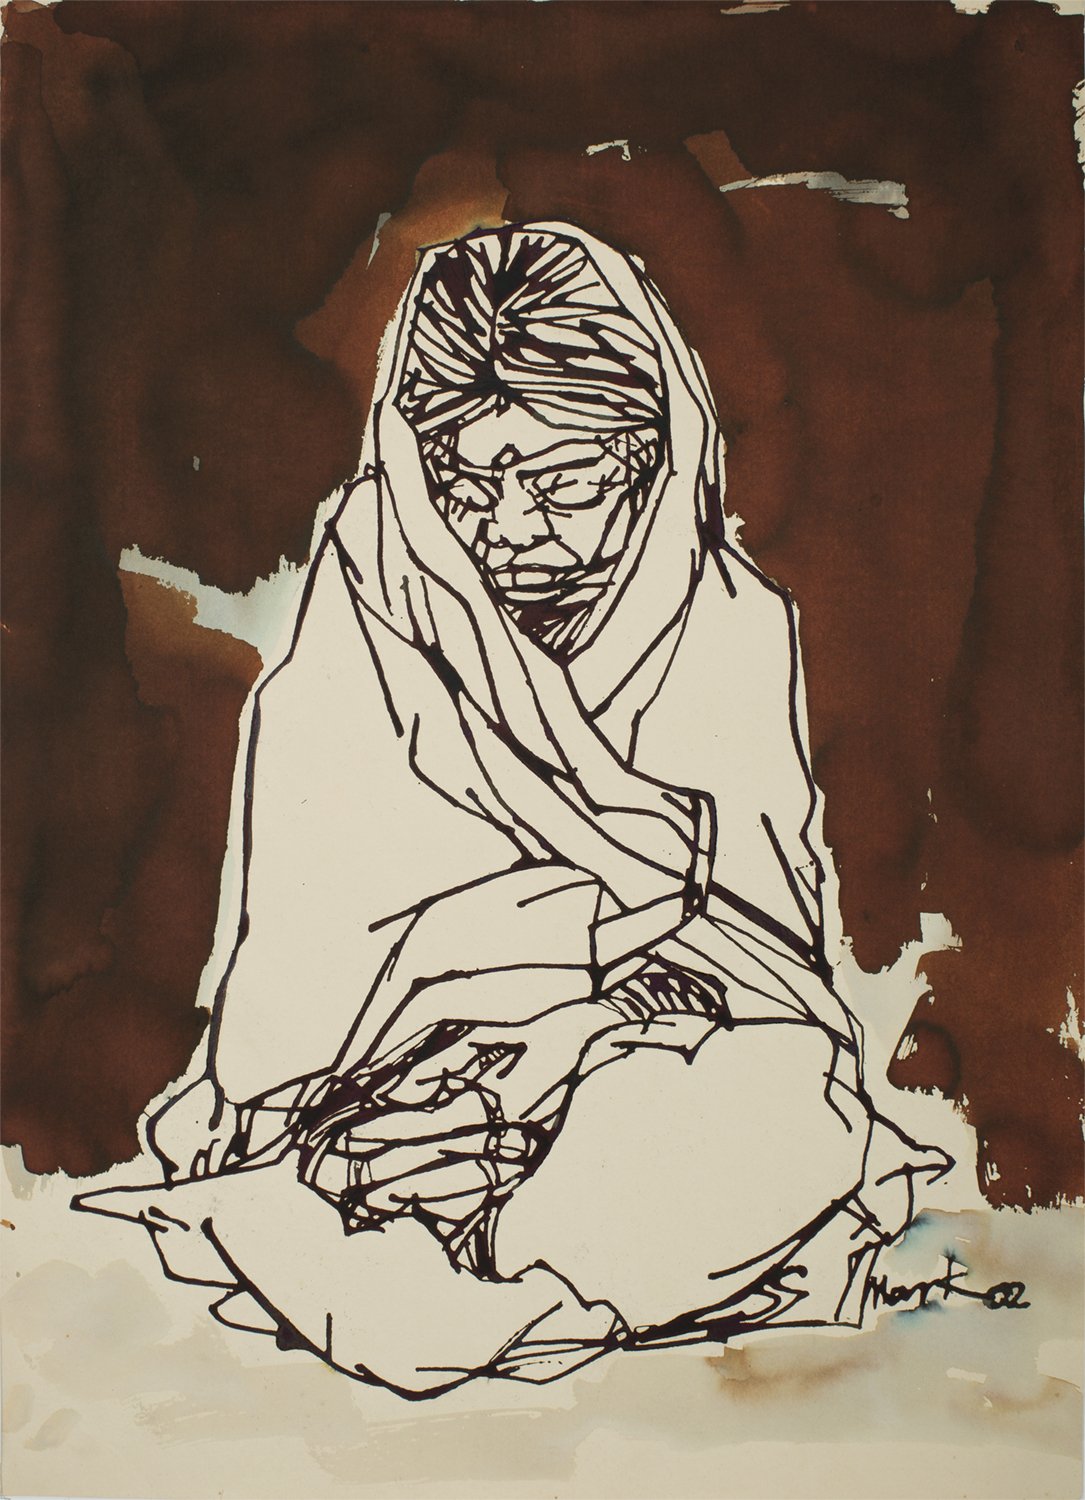 Old woman|S. Mark Rathinaraj- Pen and Ink on Paper, , 21 x 15 inches